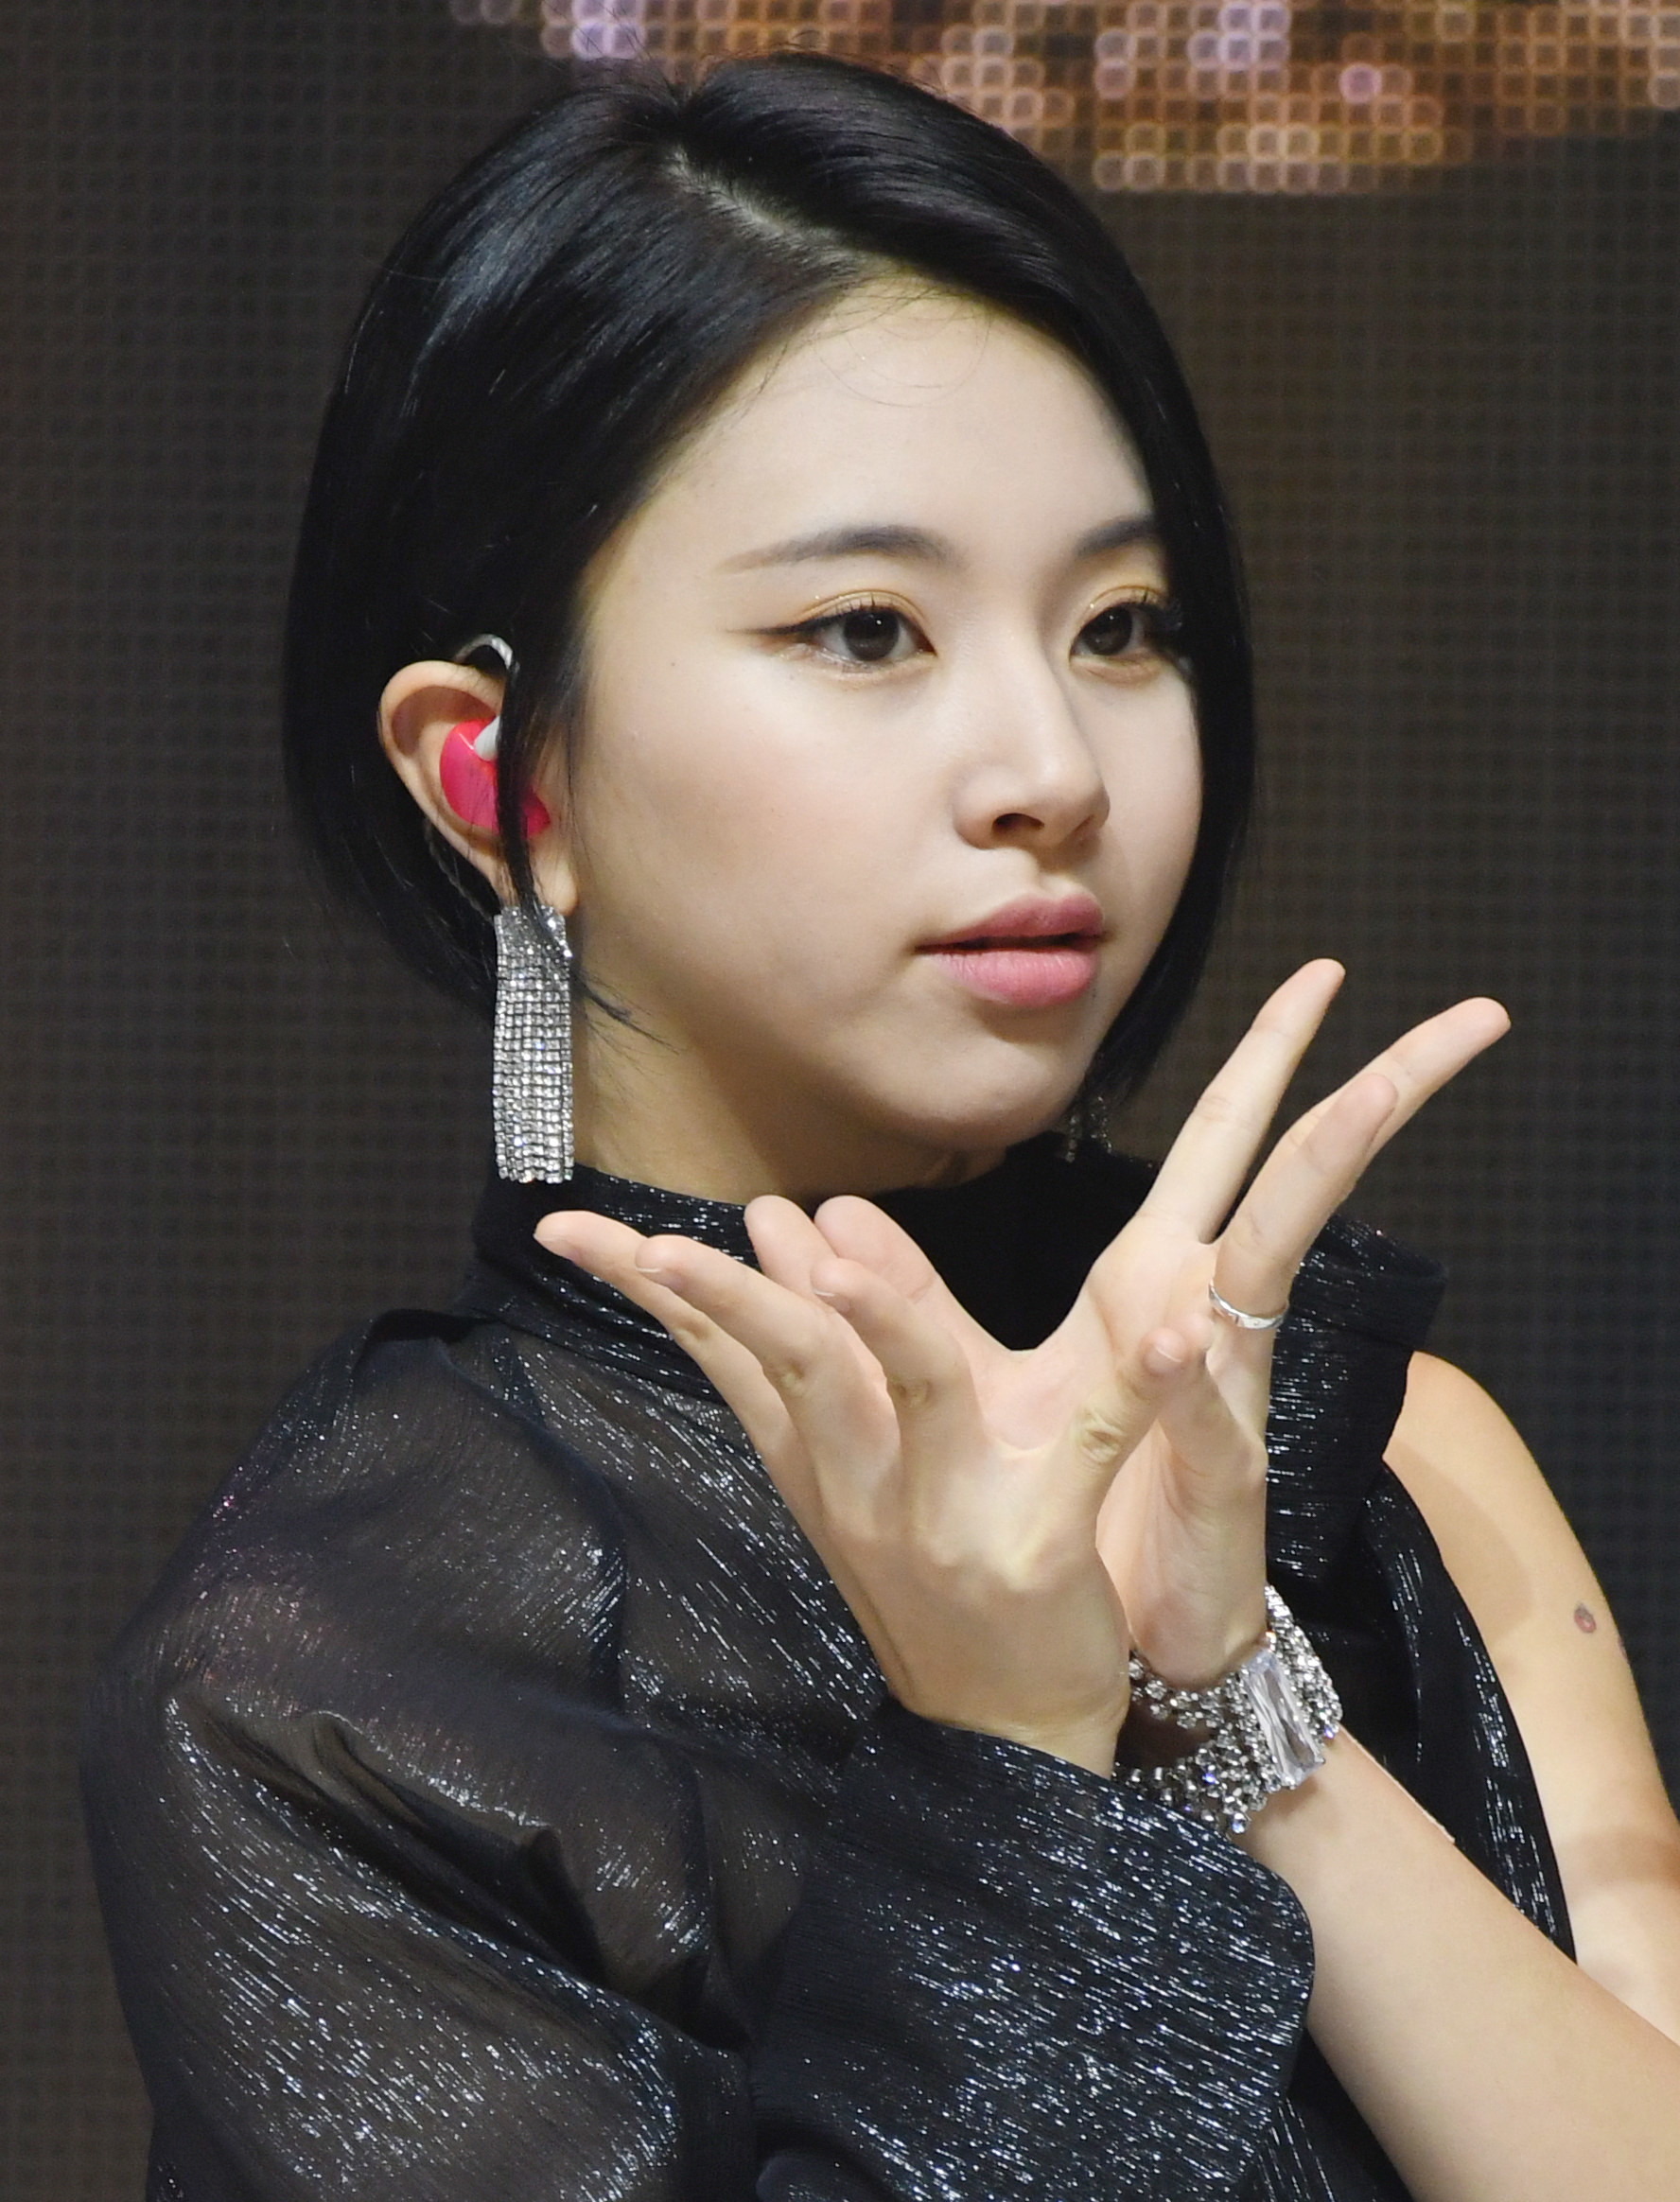 Chaeyoung holds up her hands like a flower